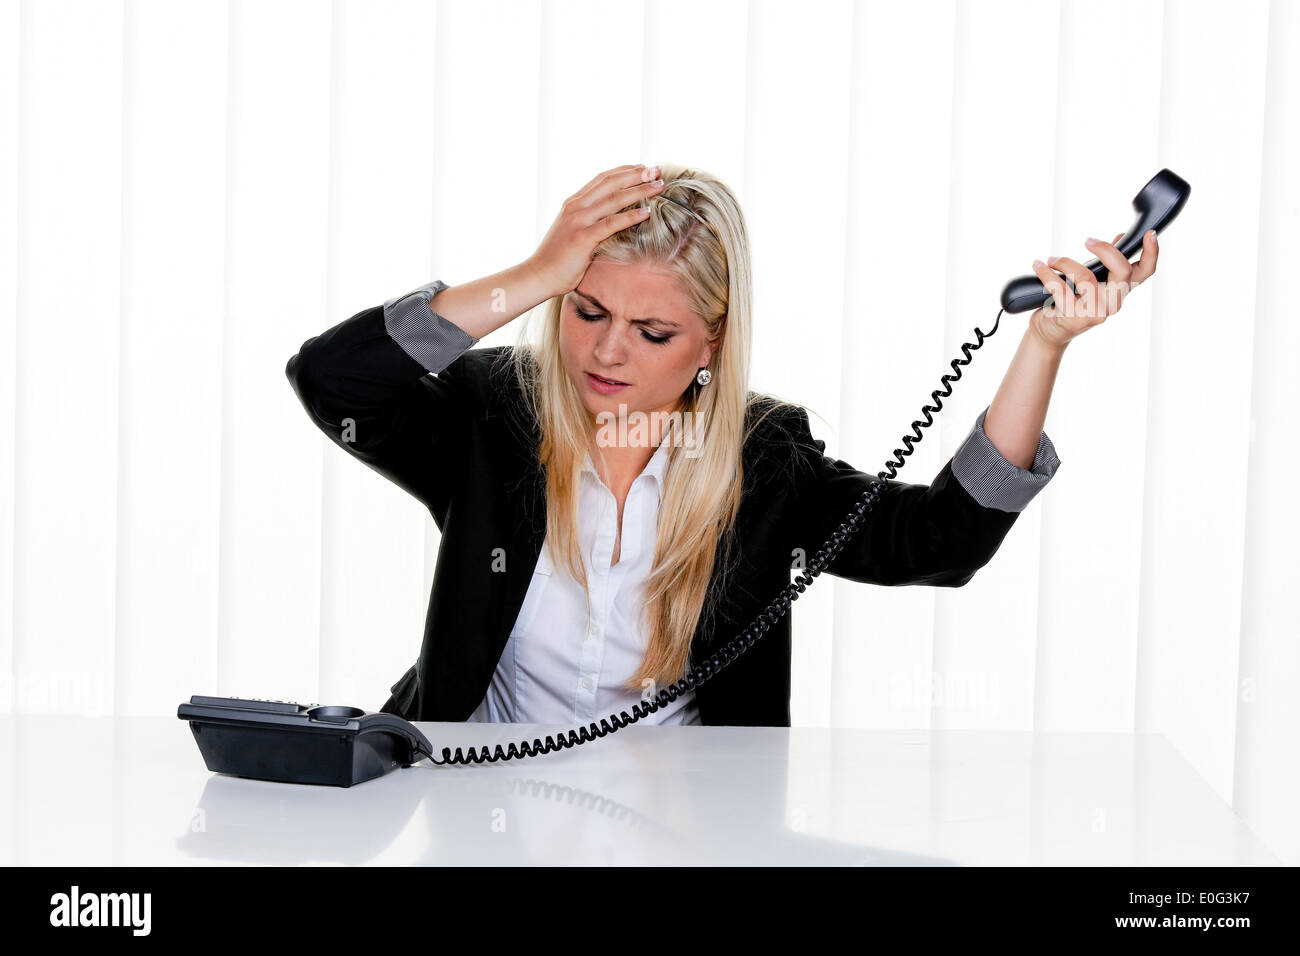 Young woman with problems and stress in the office, Junge Frau mit Problemen und Stress im Buero Stock Photo